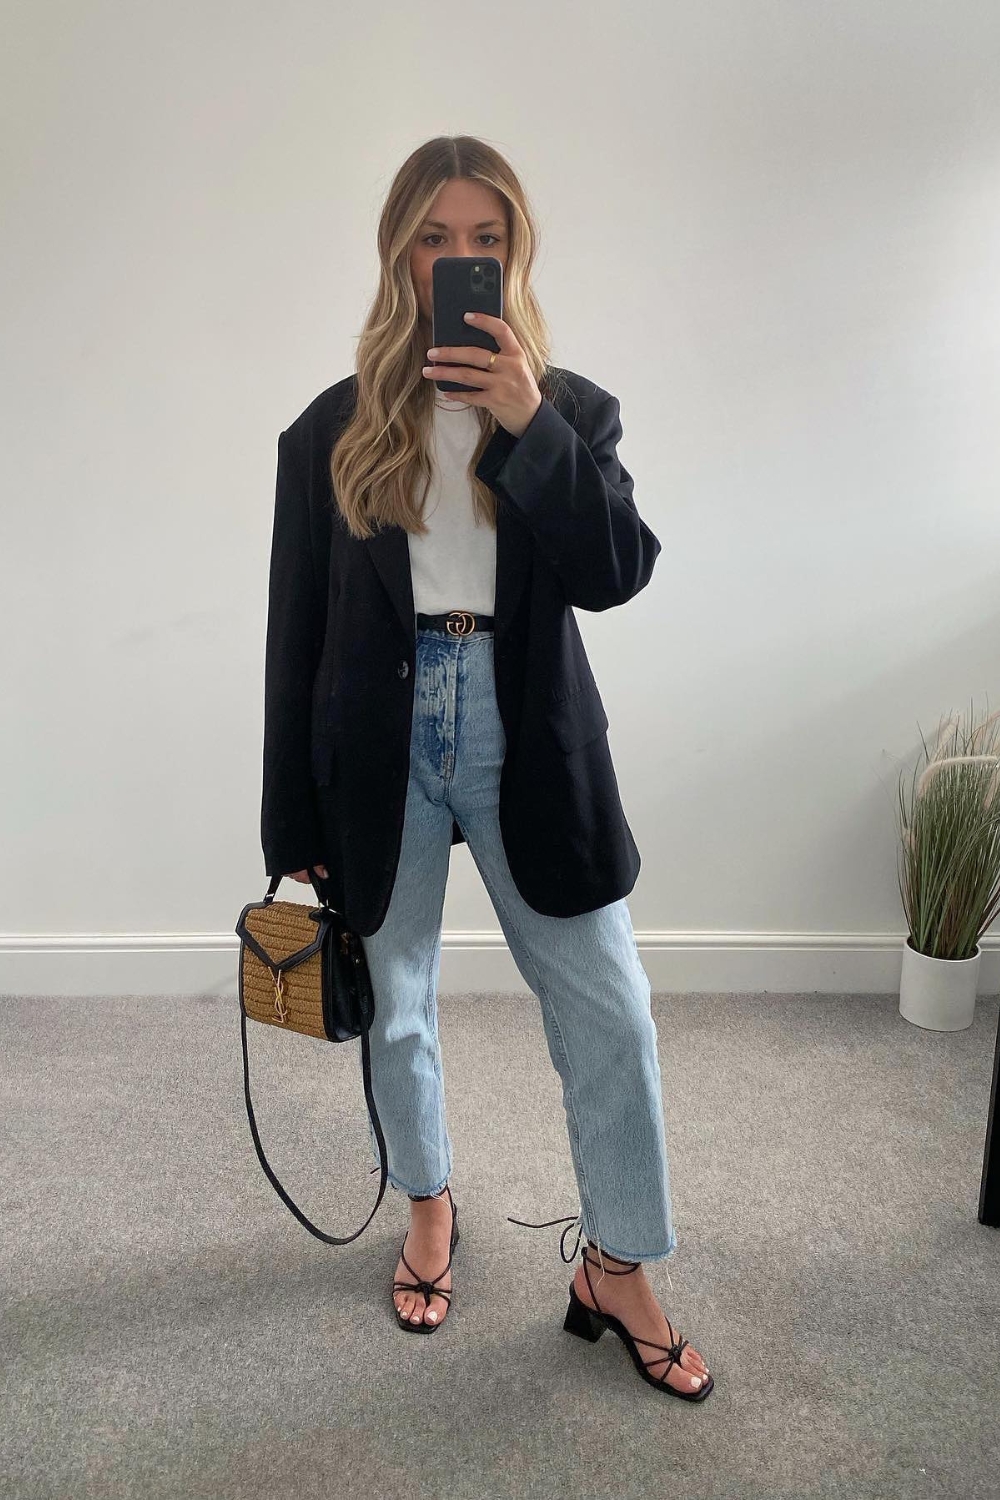 Black Blazer with jeans and strappy sandal outfit for work